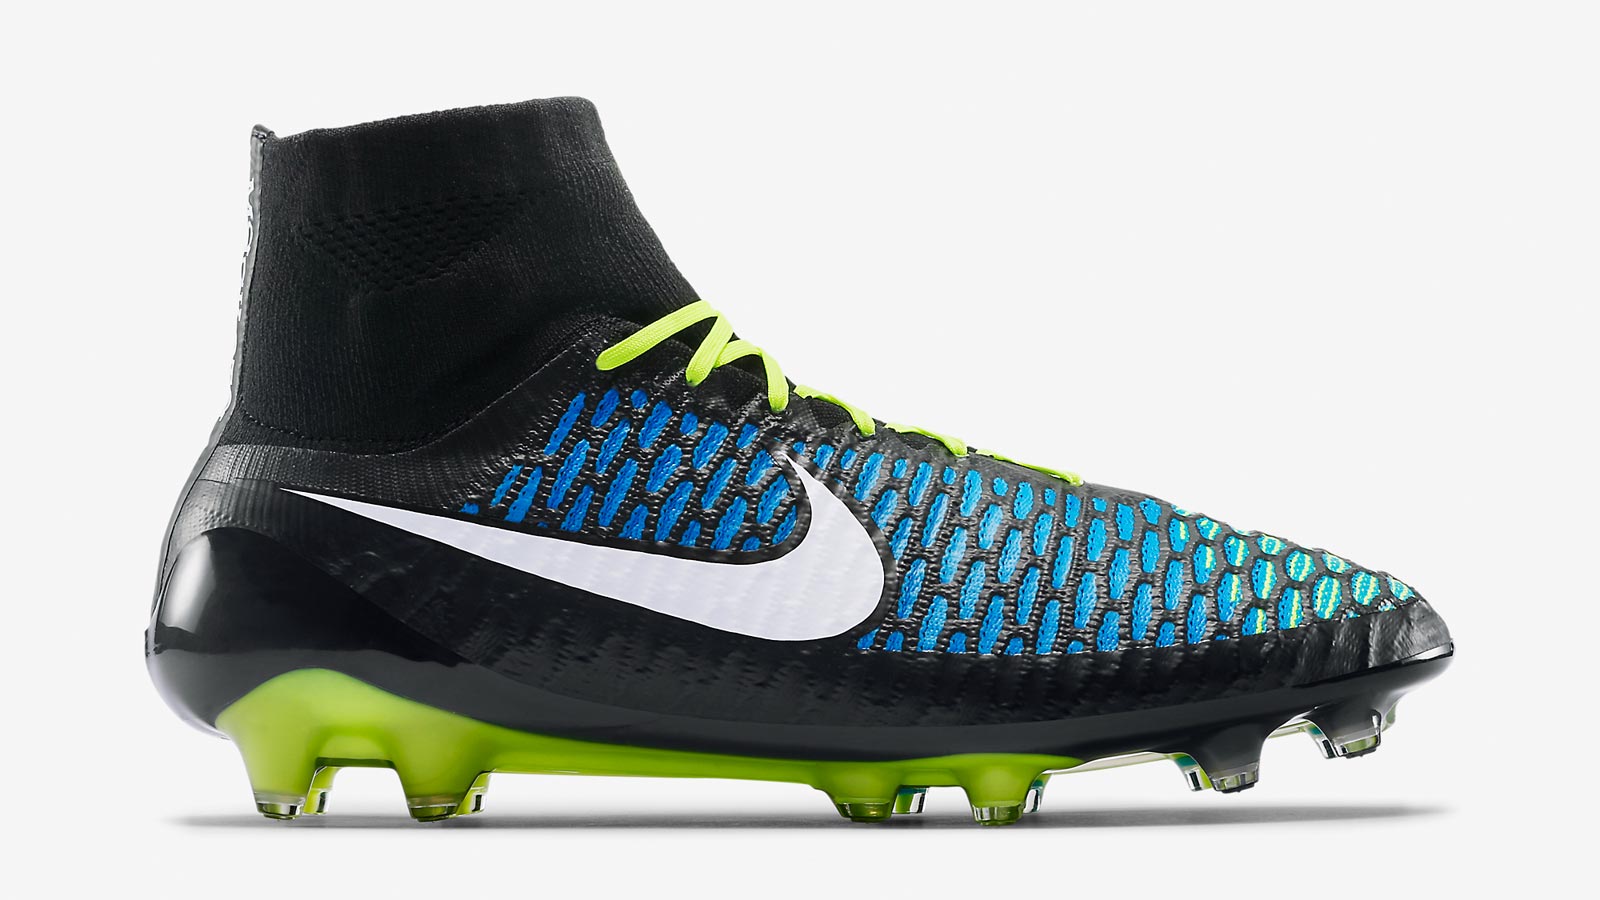 The Full History - All Colorways of the Nike Magista Obra - Footy Headlines